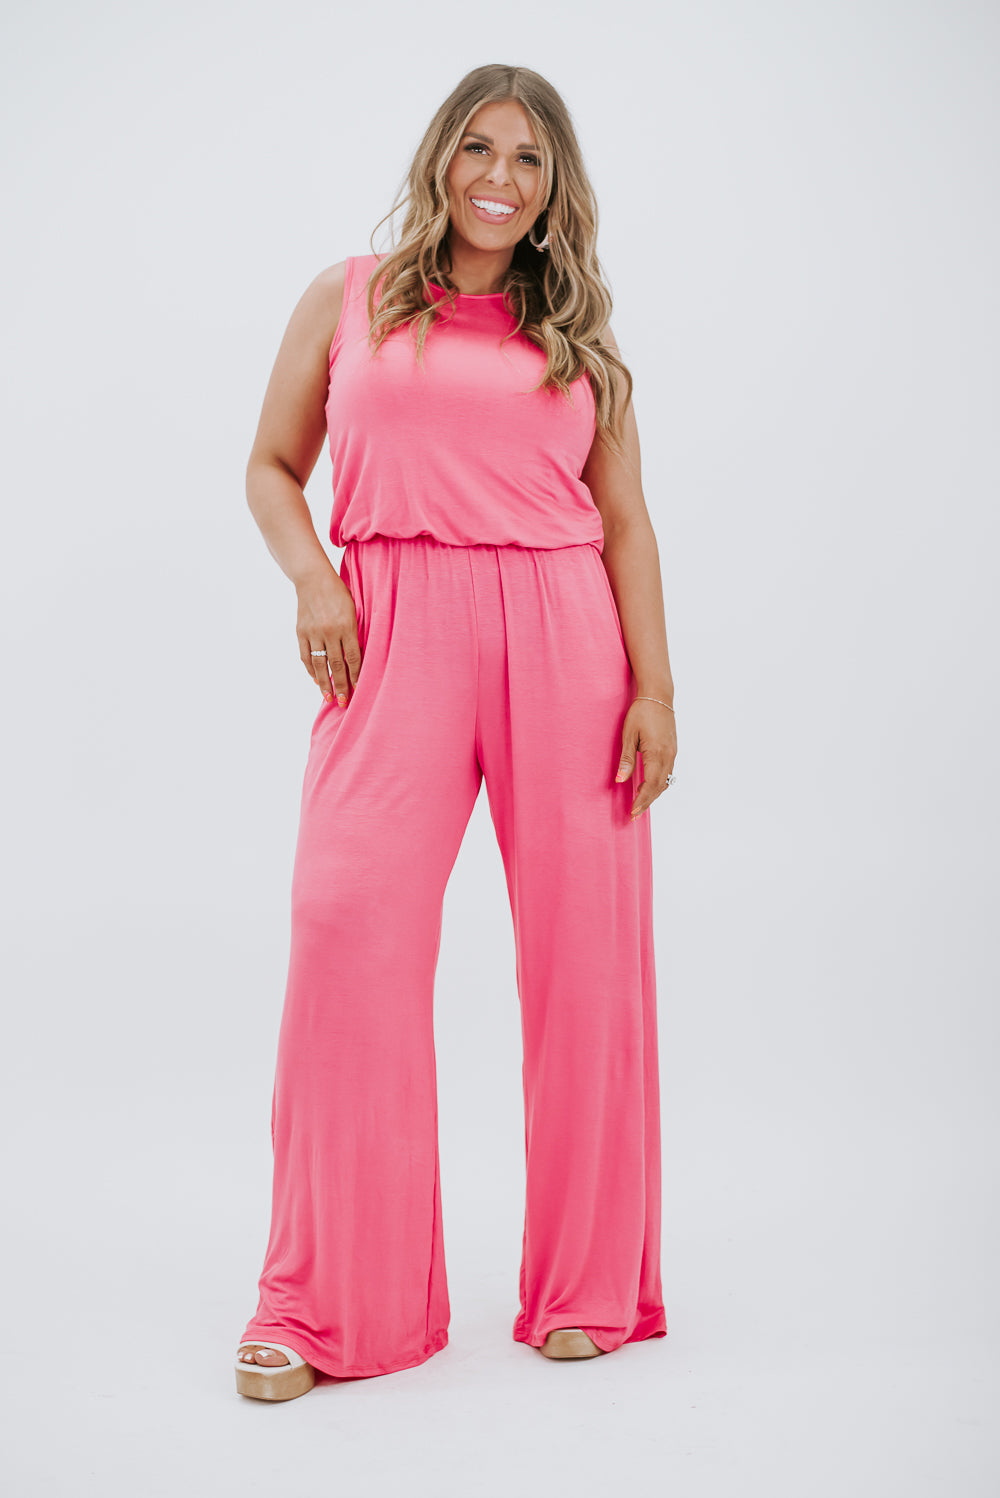 Ready for Anything Jumpsuit, Coral